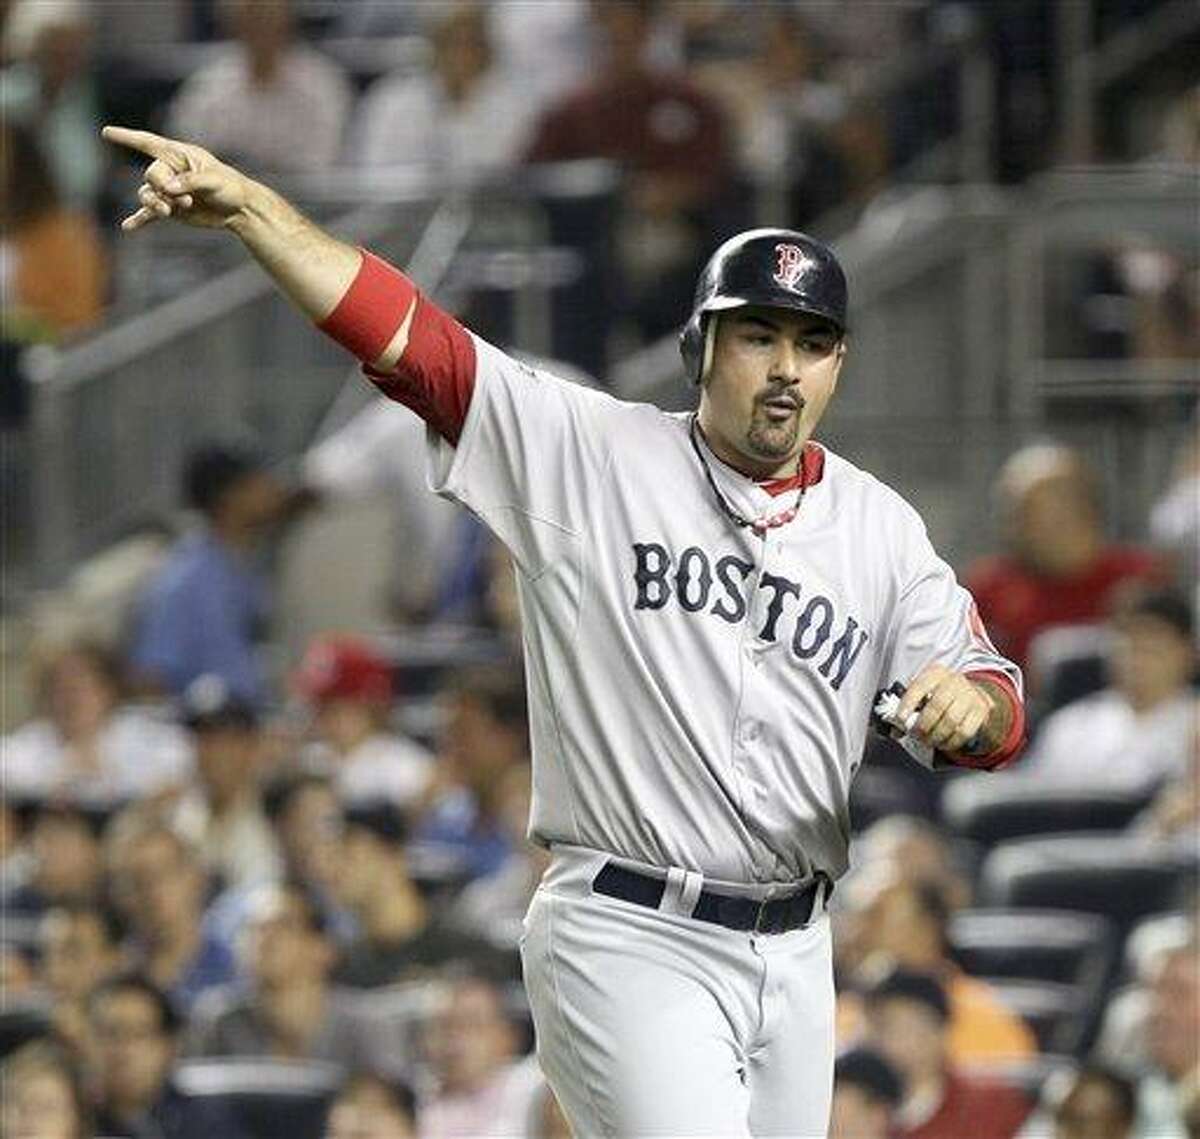 Boston Red Sox's Adrian Gonzalez reacts after scoring on a double by Ryan Sweeney during the second inning of a baseball game against the New York Yankees at Yankee Stadium in New York, Sunday, July 29, 2012. (AP Photo/Seth Wenig)